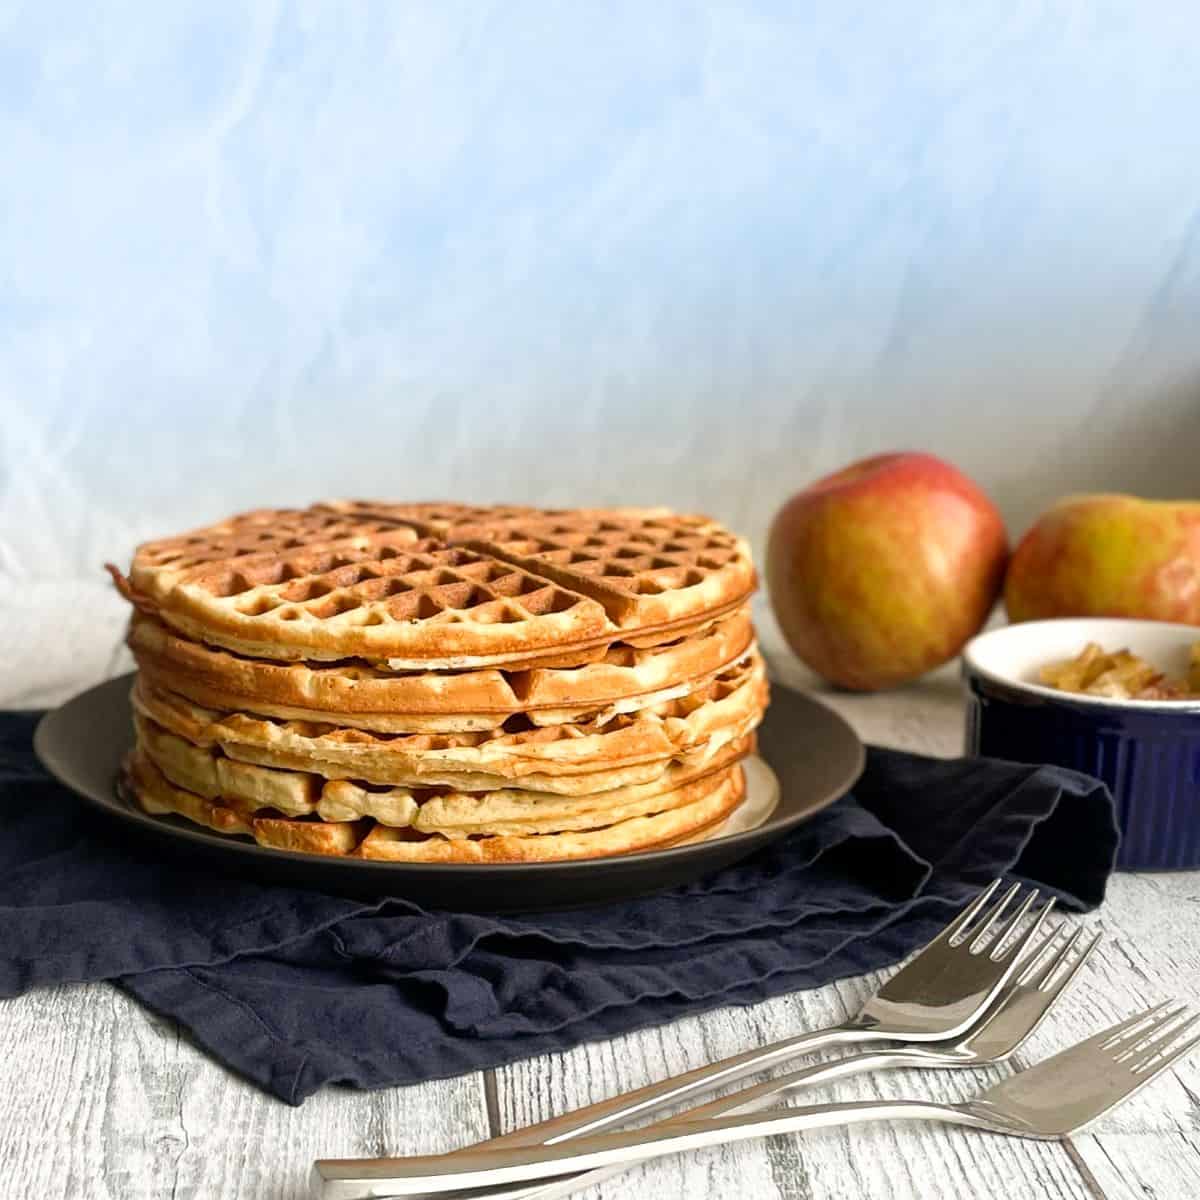 a stack of apple waffles on a plate with three forks, two apples, and caramelized onion bowl.